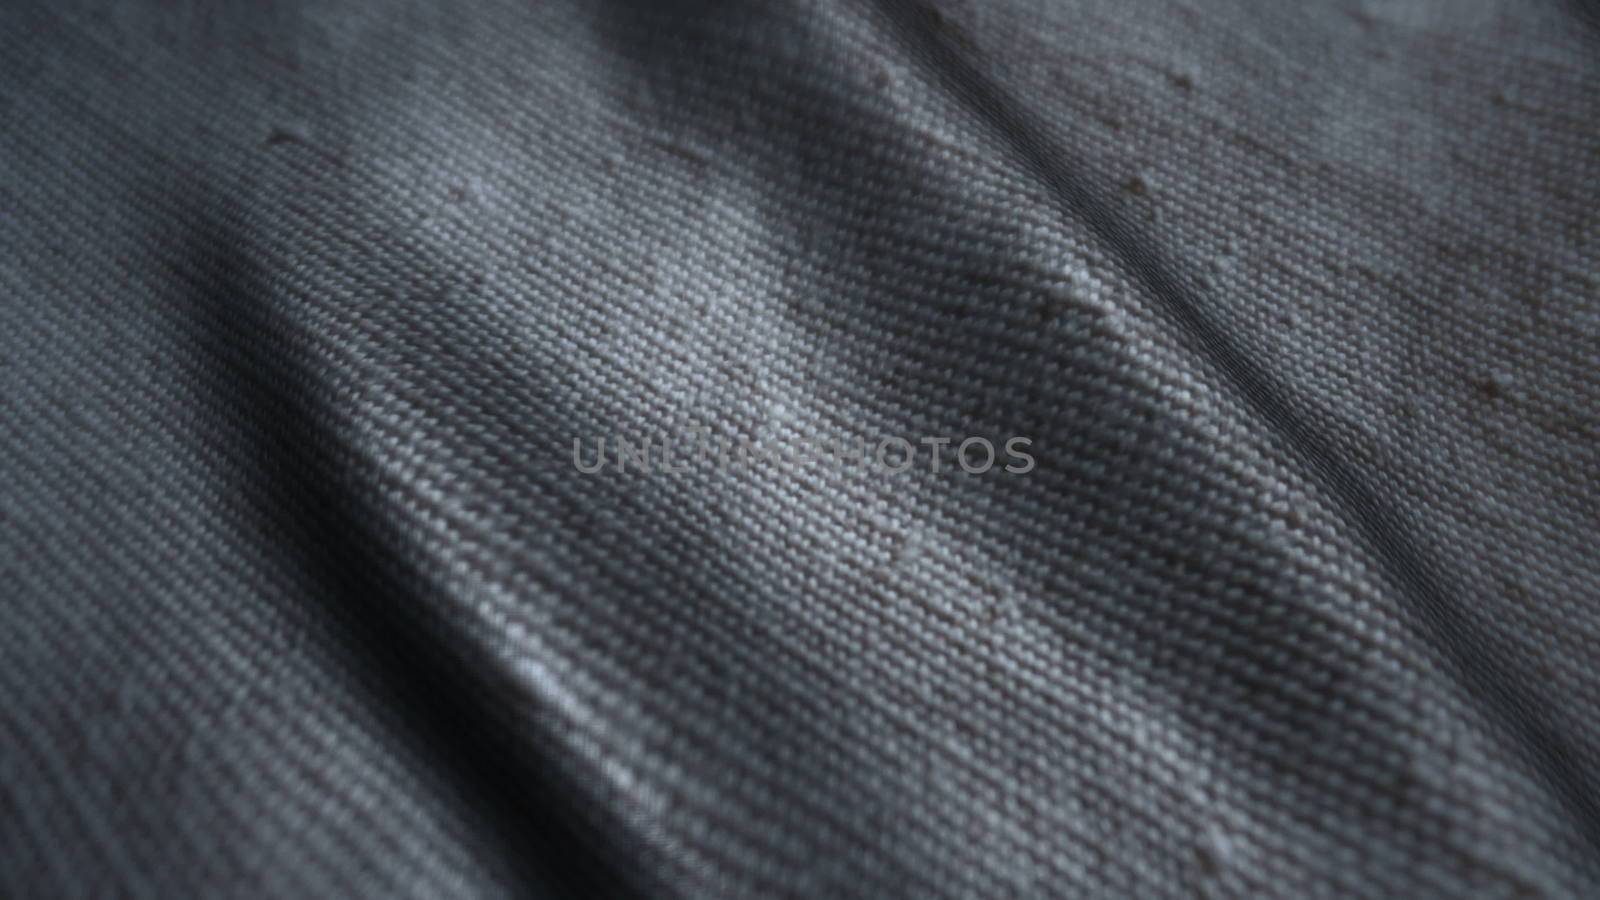 Neutral gray fabric background waving in the wind. Easy to colorize to any color desired.